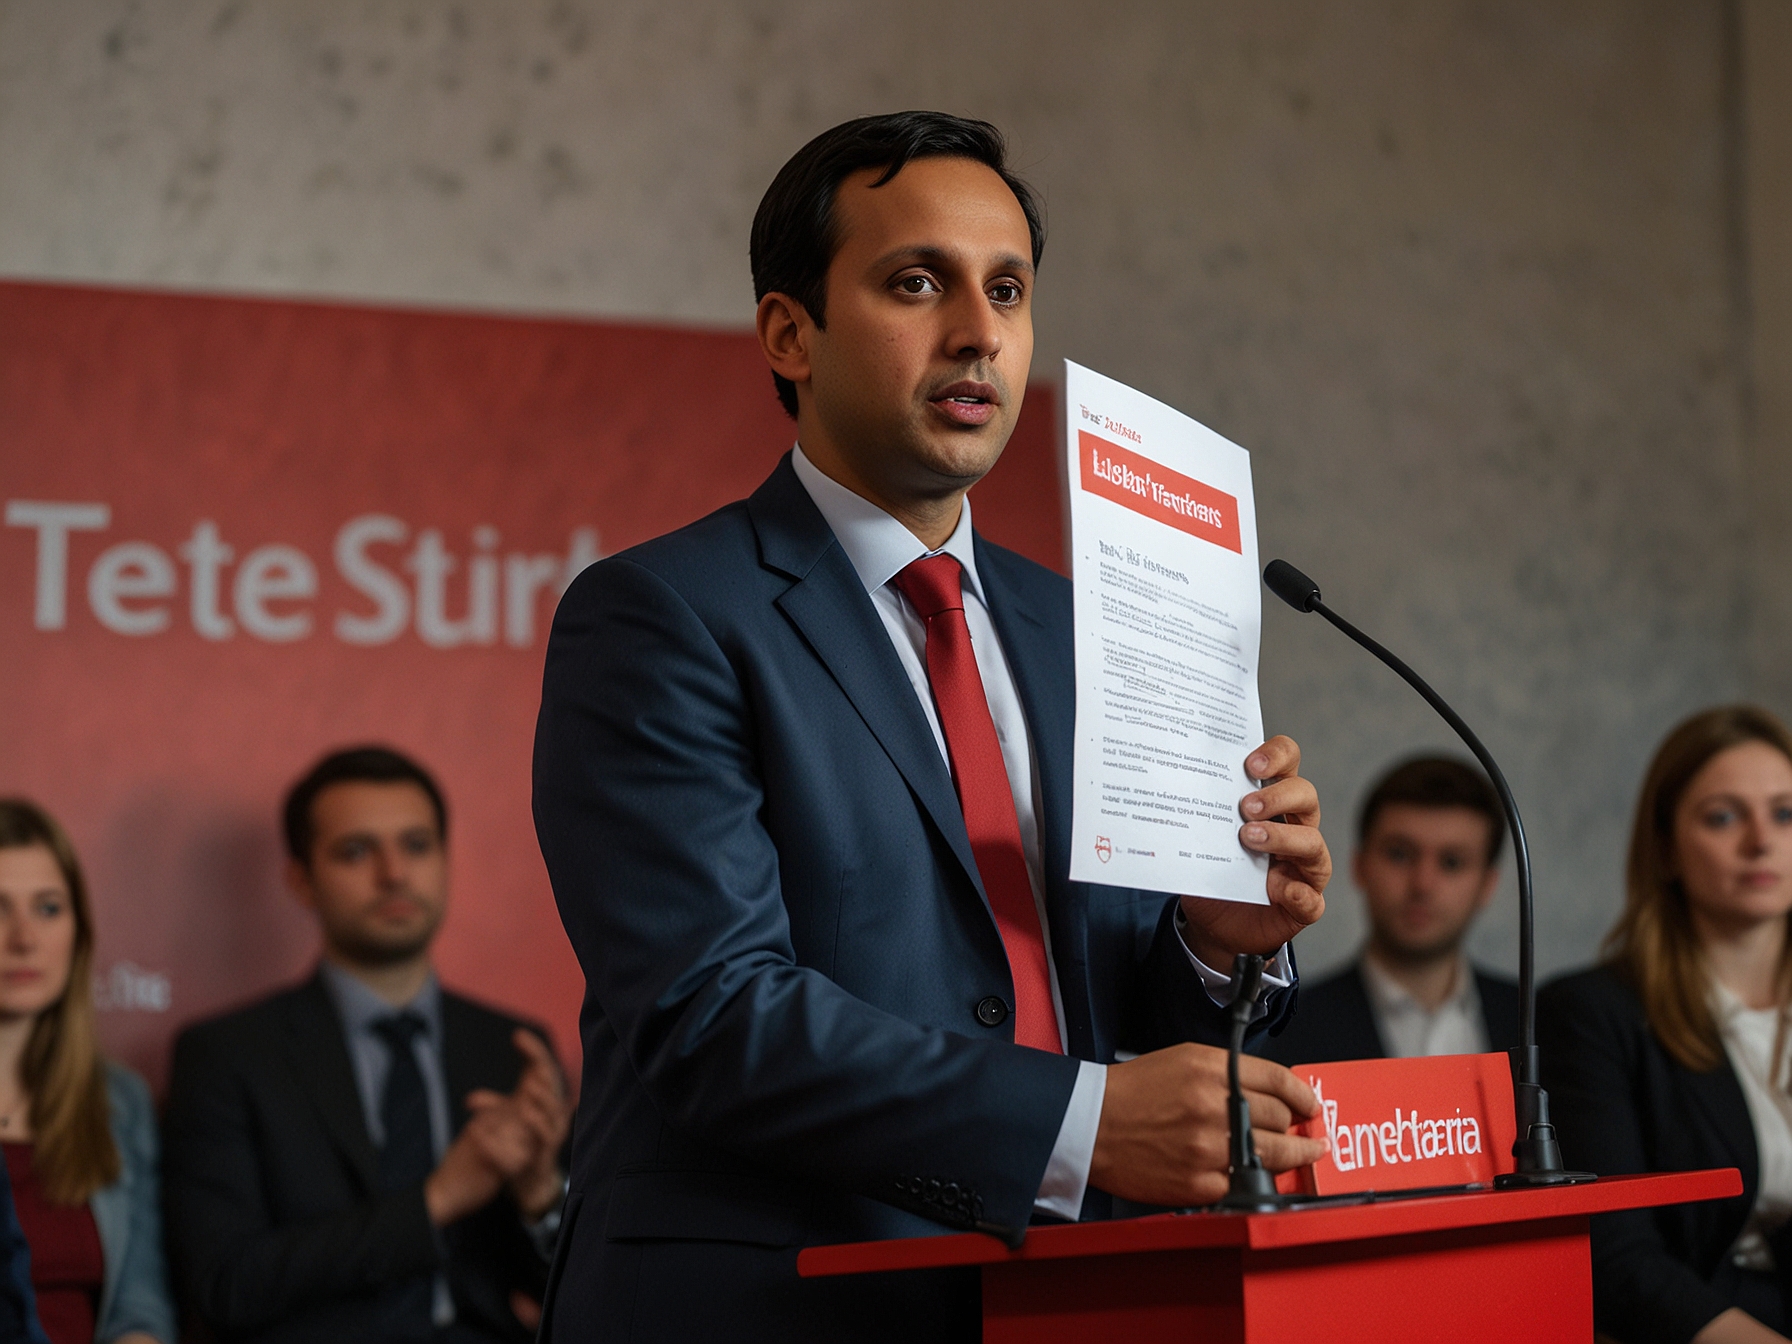 Anas Sarwar presenting the Labour manifesto at a press conference, emphasizing the importance of a 'cradle to career' approach for the youth of Scotland.